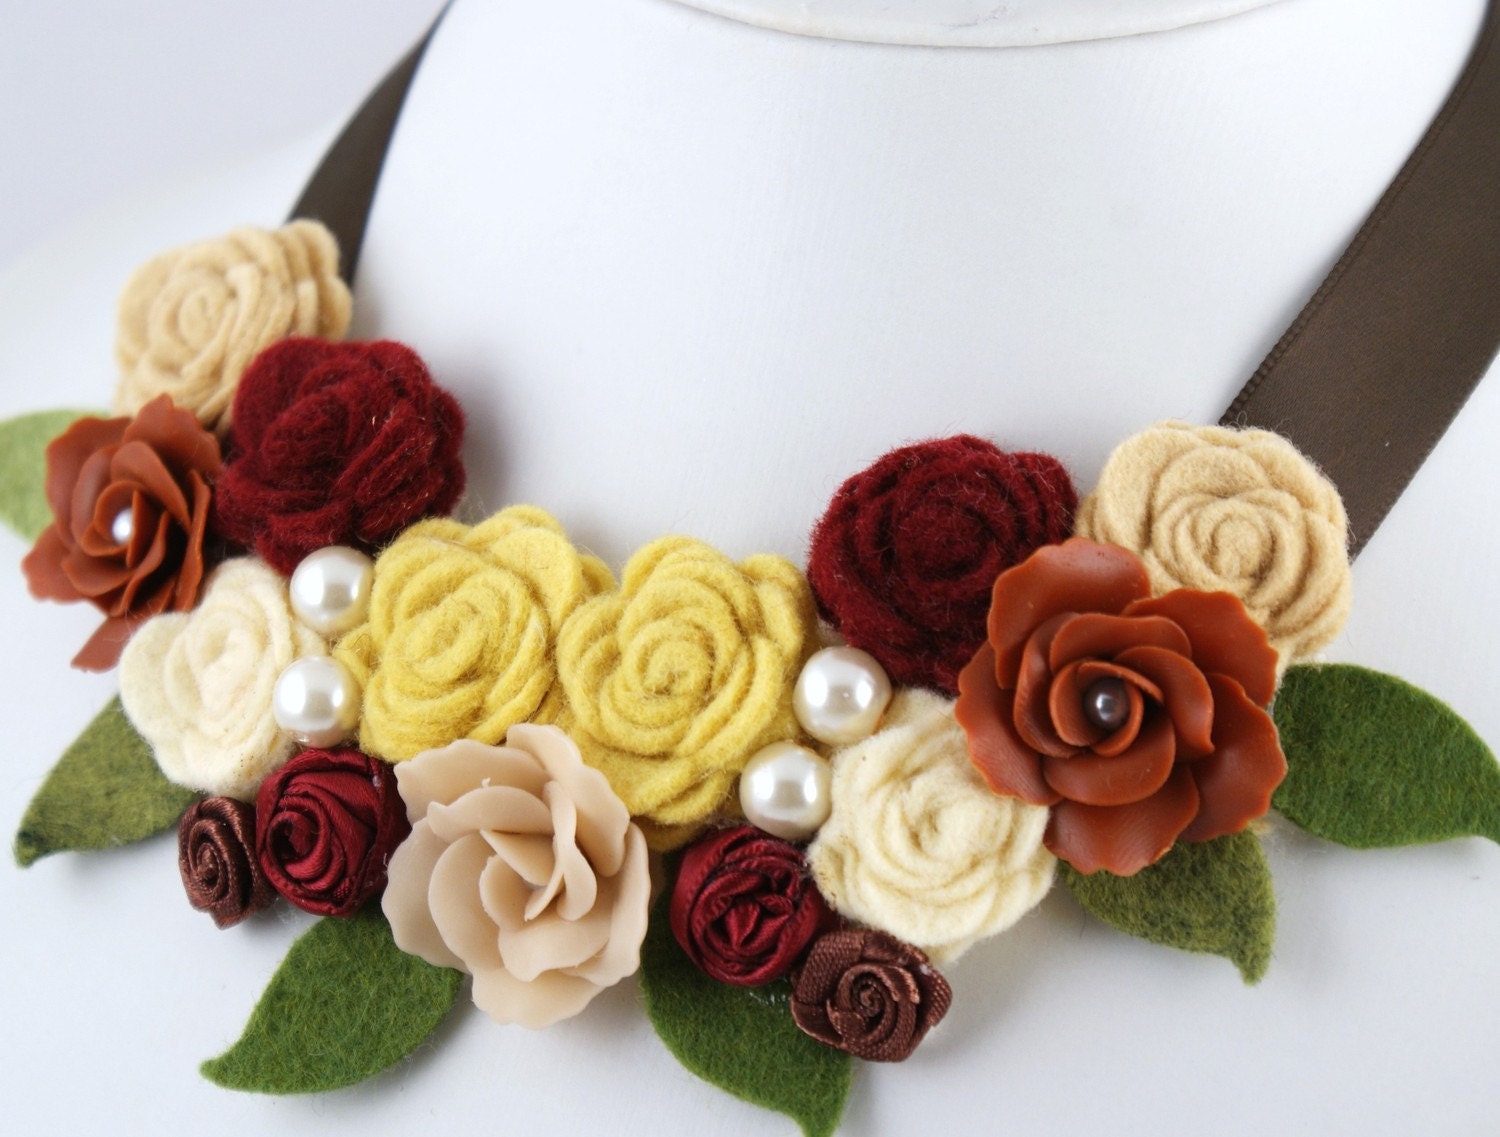 ON SALE- Harvest - Floral Statement Necklace with Handmade  Felt Flowers and Leaves